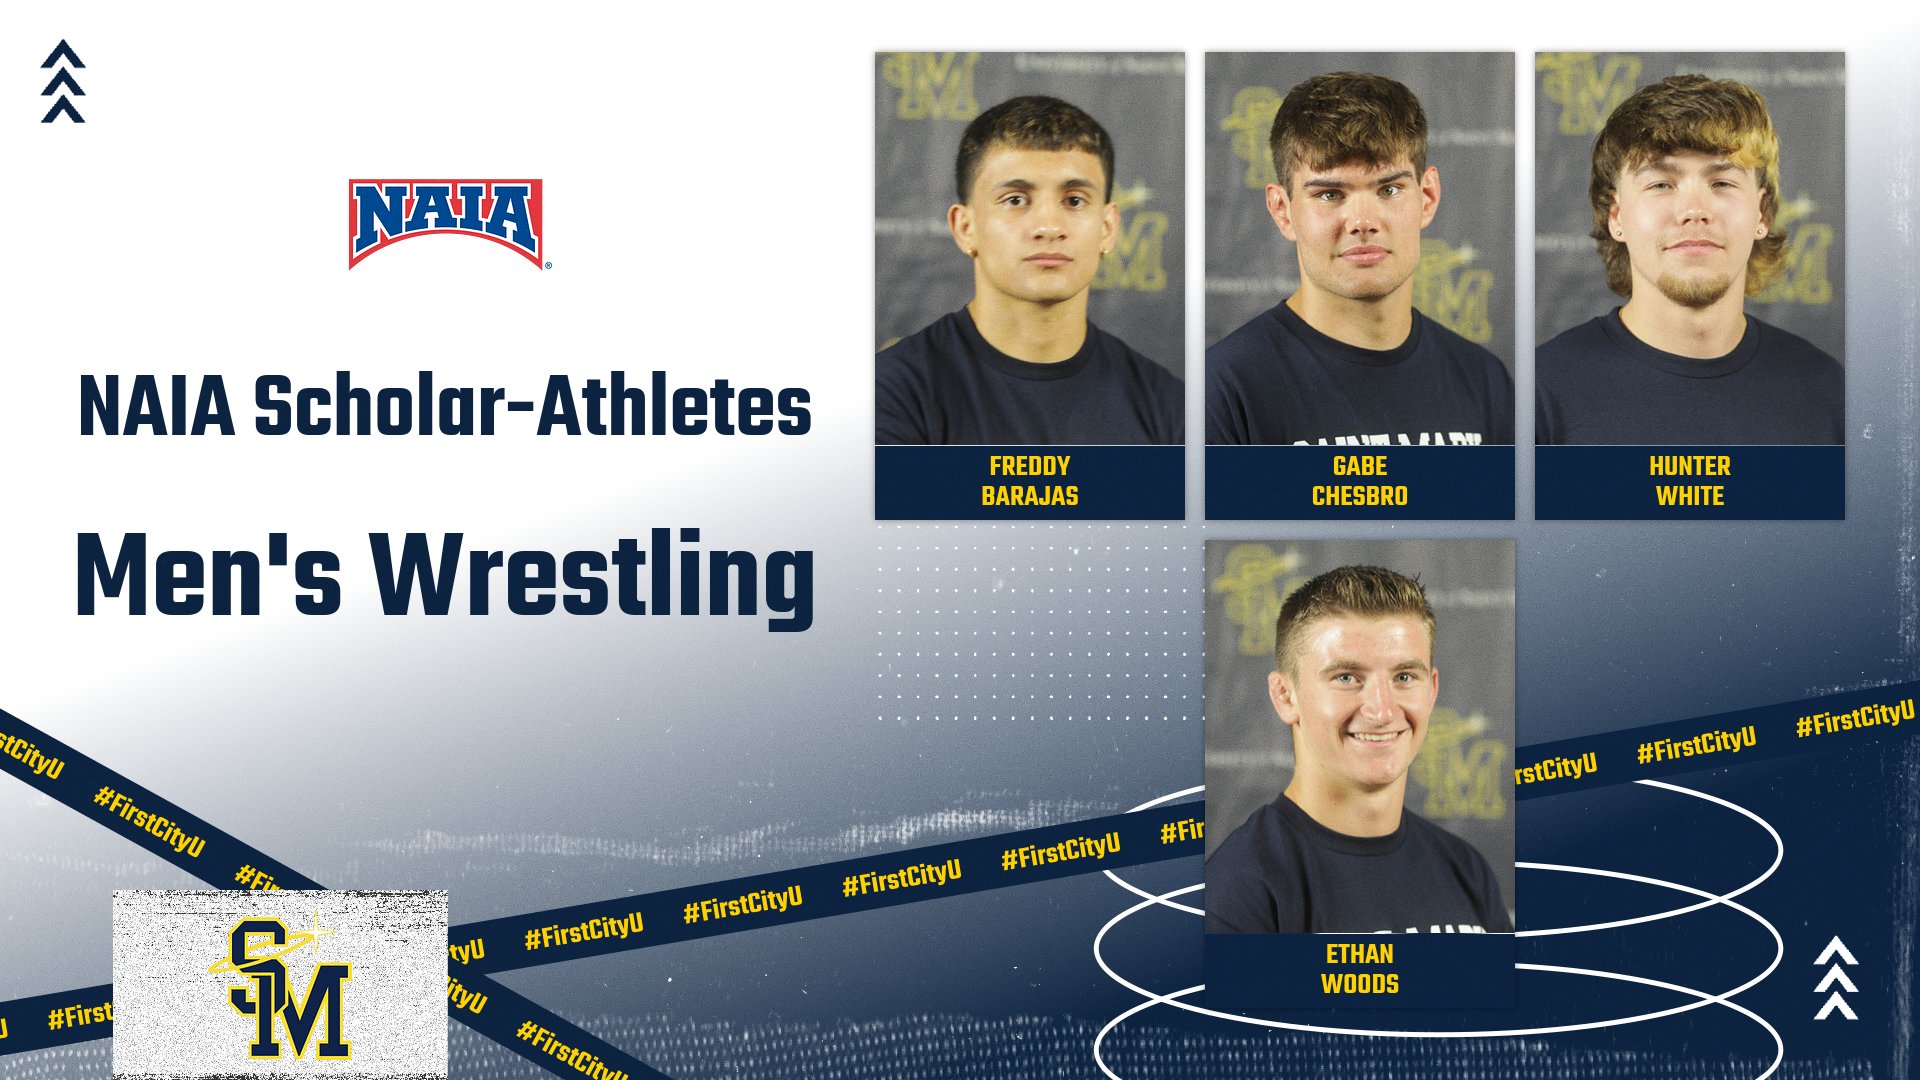 Four Men's Wrestlers honored as NAIA Scholar-Athletes